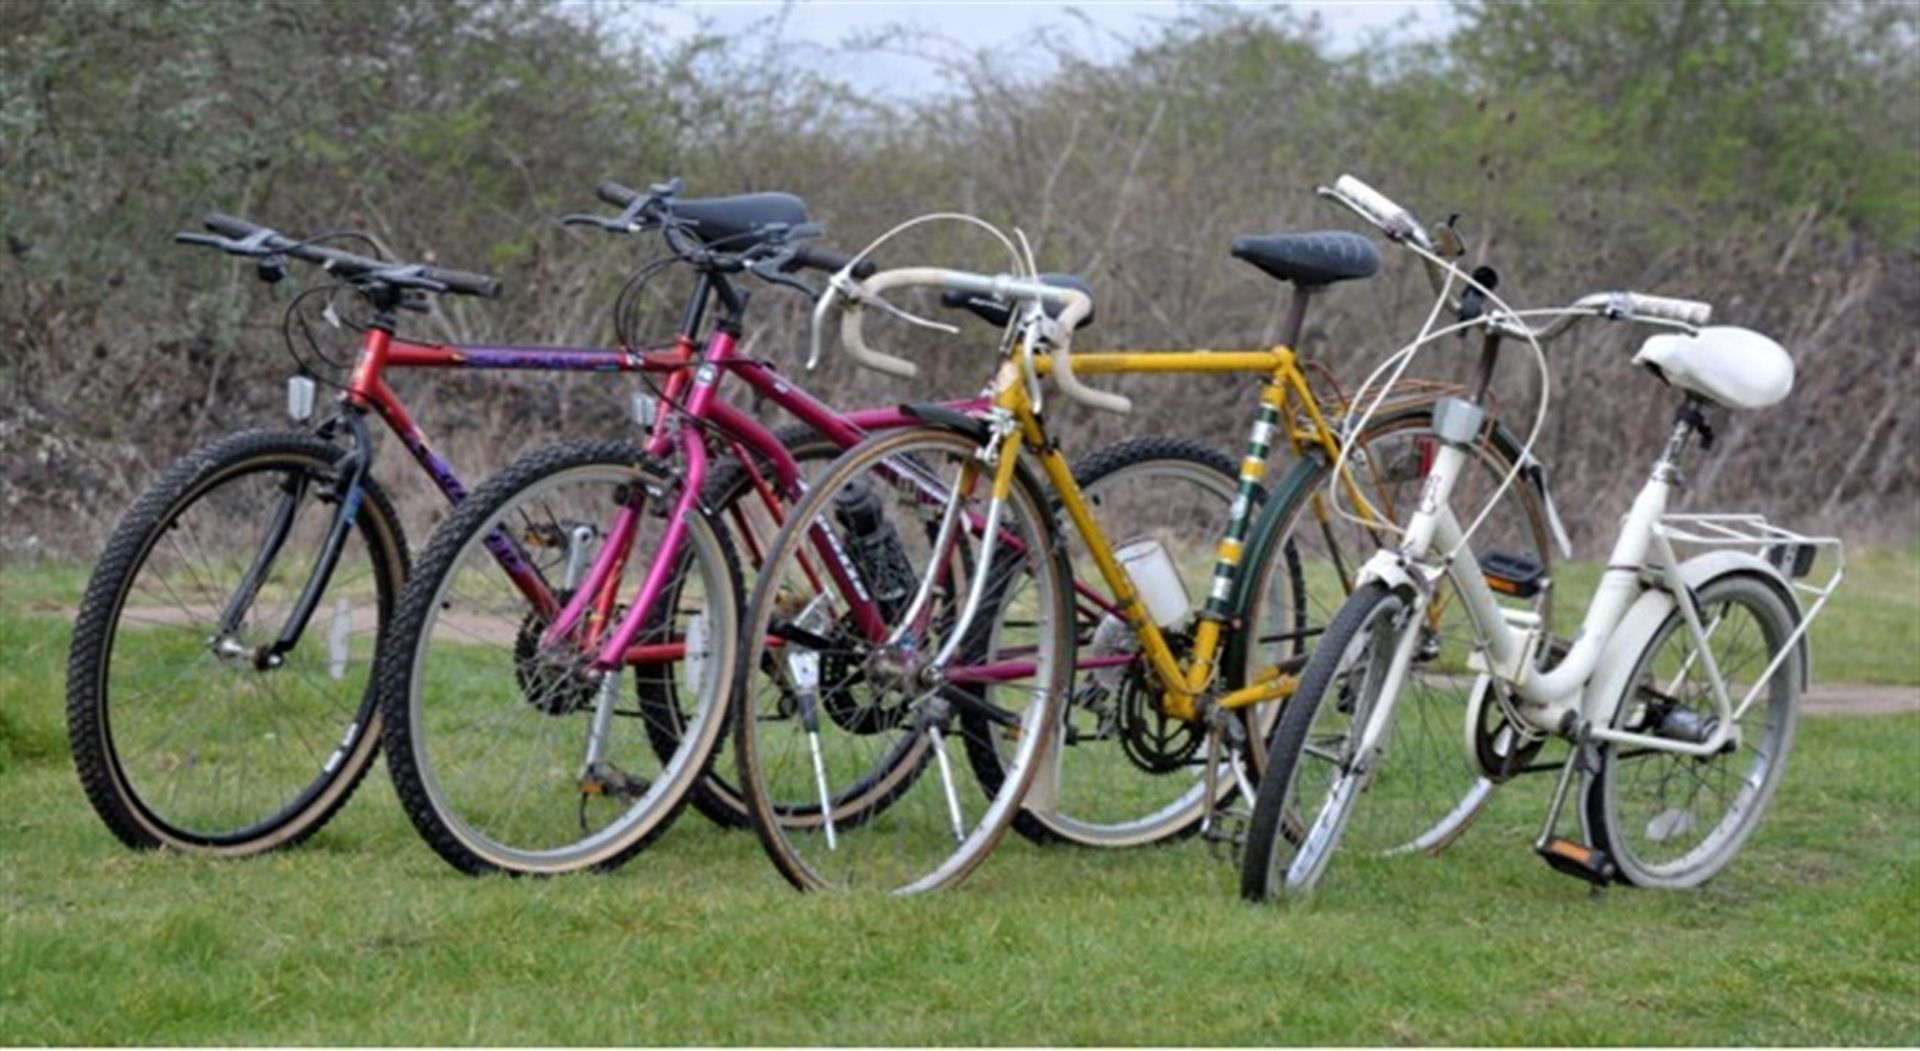 Four Bicycles to include Apollo, Raleigh white ladies cycle, Carrera Boys bike, Dawes Gents bike in - Image 2 of 5